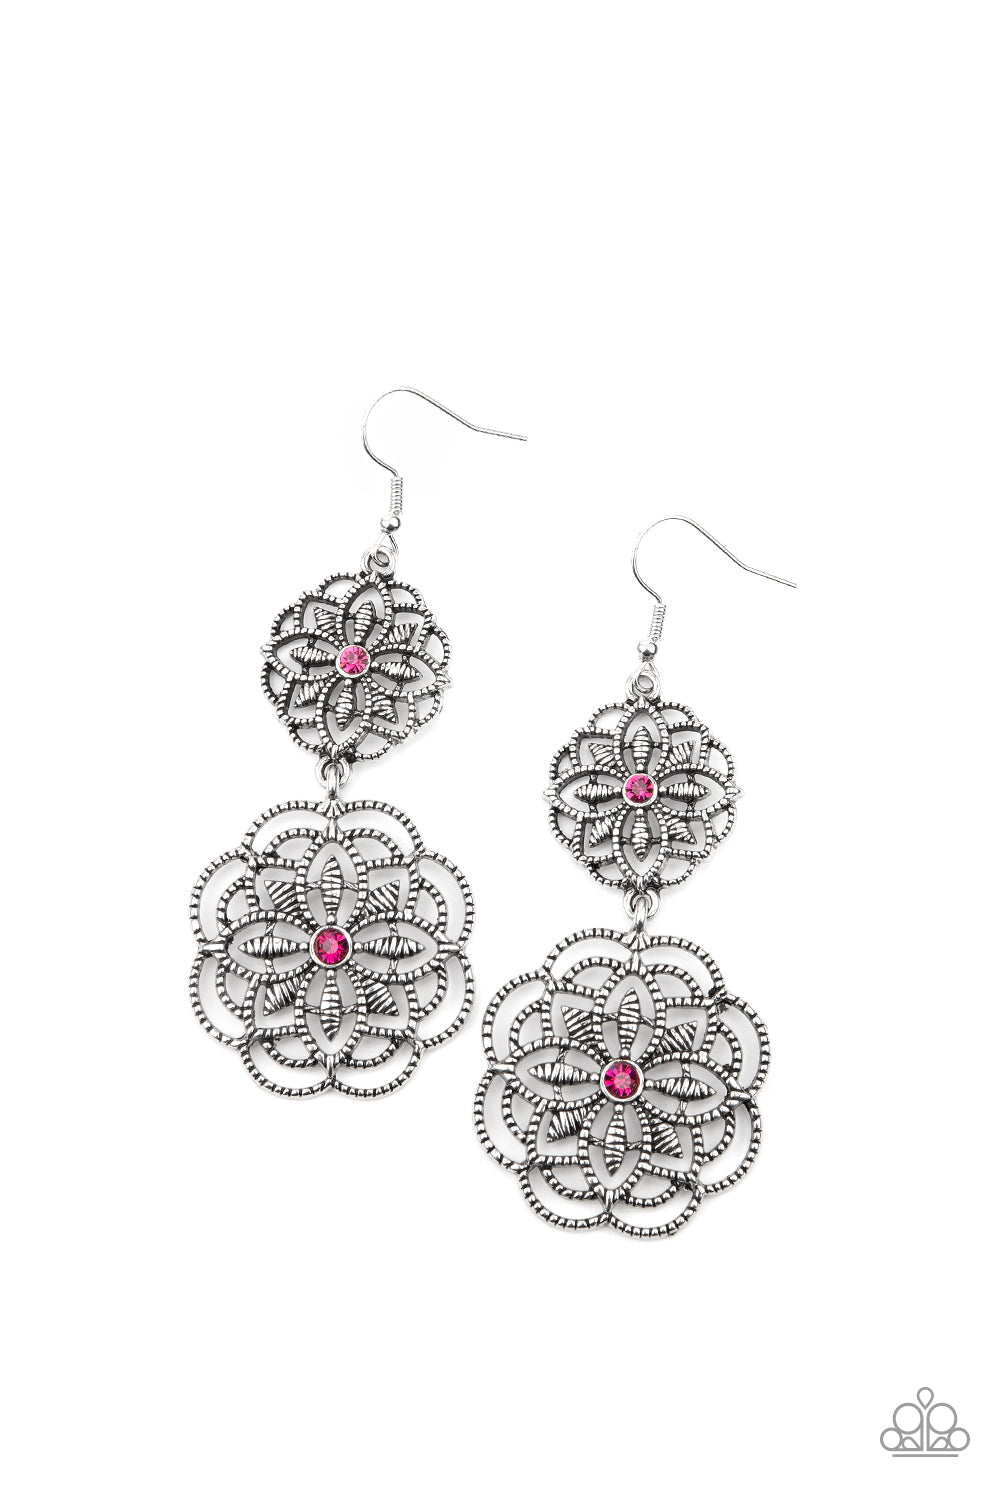 Mandala Mecca - Pink and Silver Floral Earrings - Paparazzi Accessories - Dotted with dainty pink rhinestone centers, studded mandala-like silver frames connect into a whimsical floral lure. Earring attaches to a standard fishhook fitting. Sold as one pair of earrings.